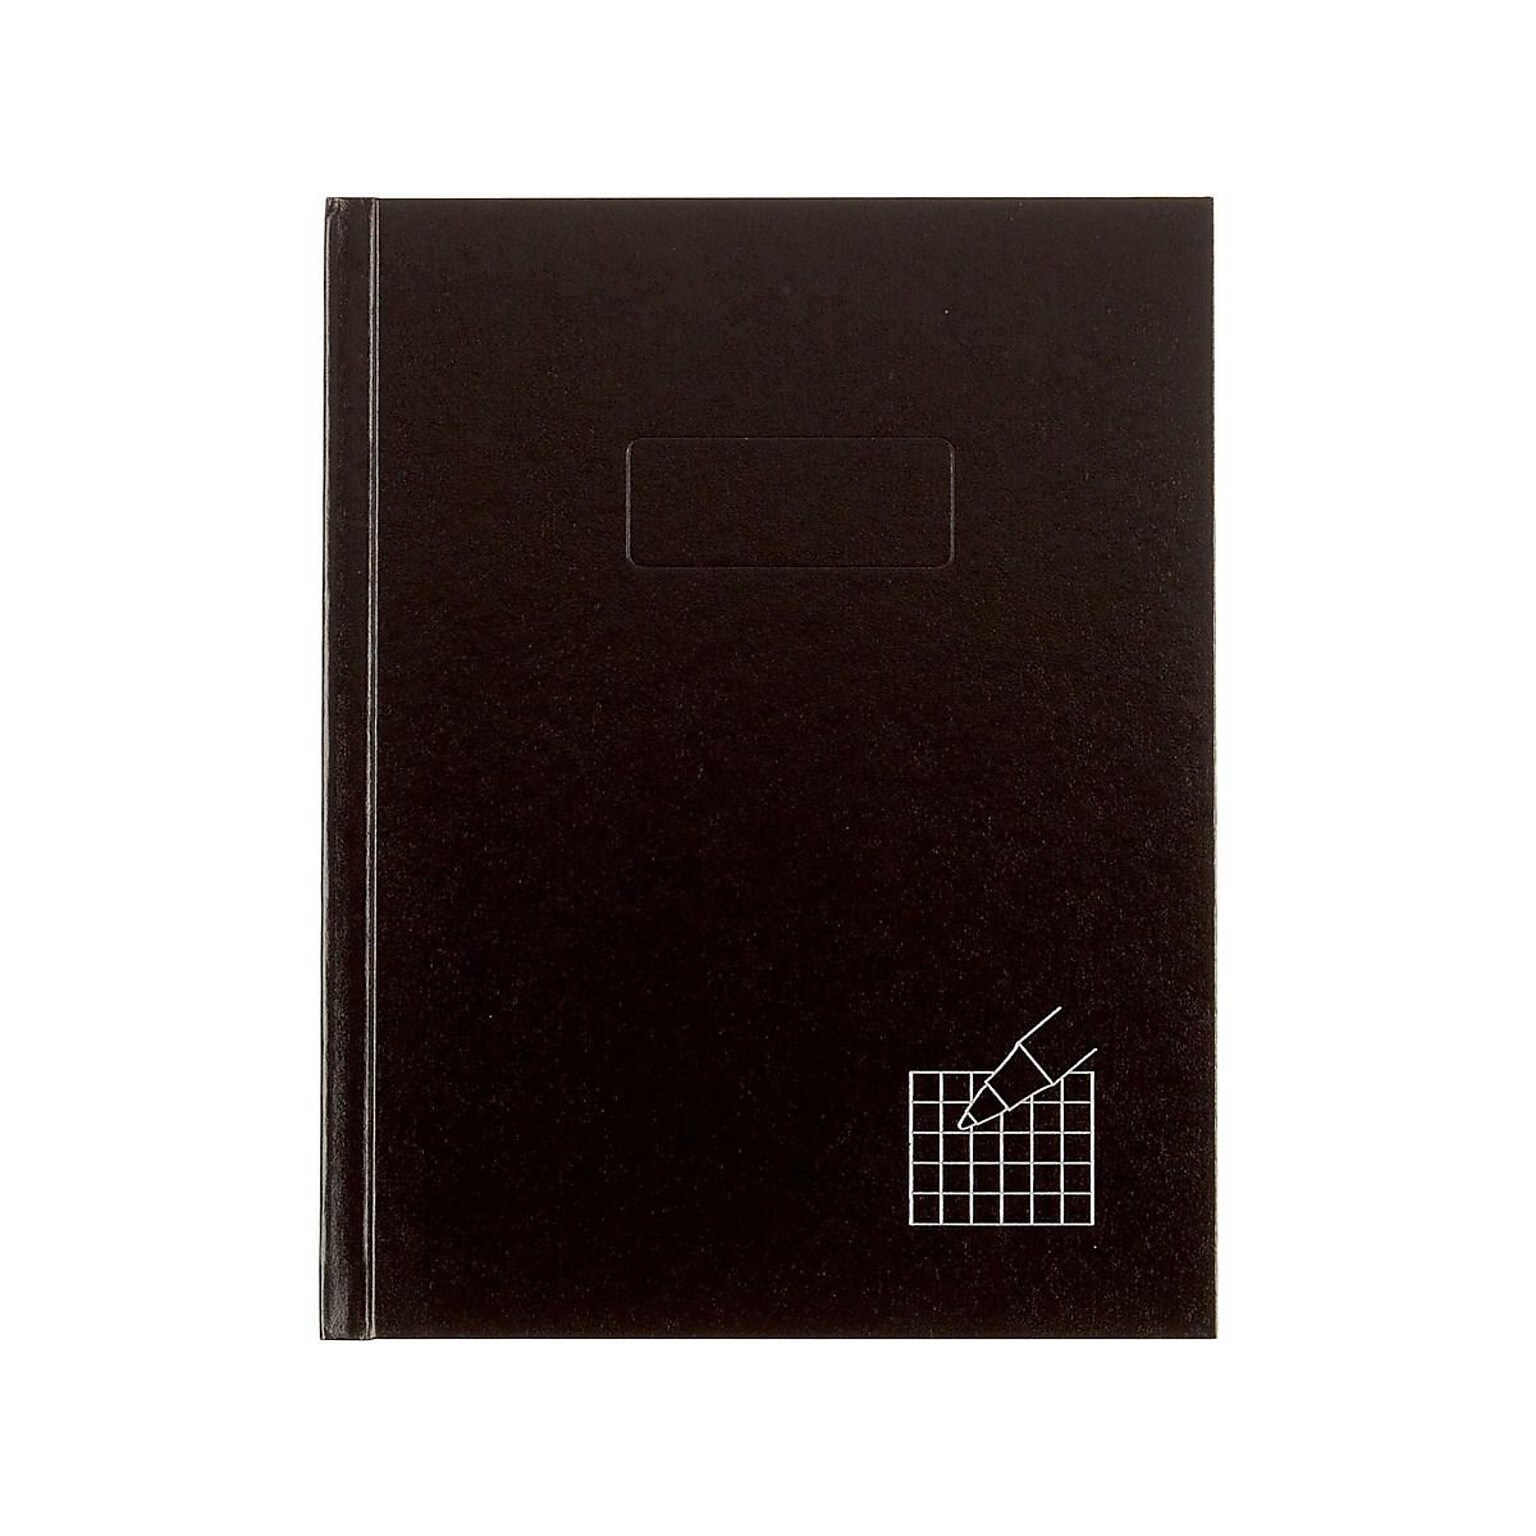 Rediform Executive and Journals 1-Subject Professional Notebooks, 7.25 x 9.25, Quad, 96 Sheets, Black (A9Q)